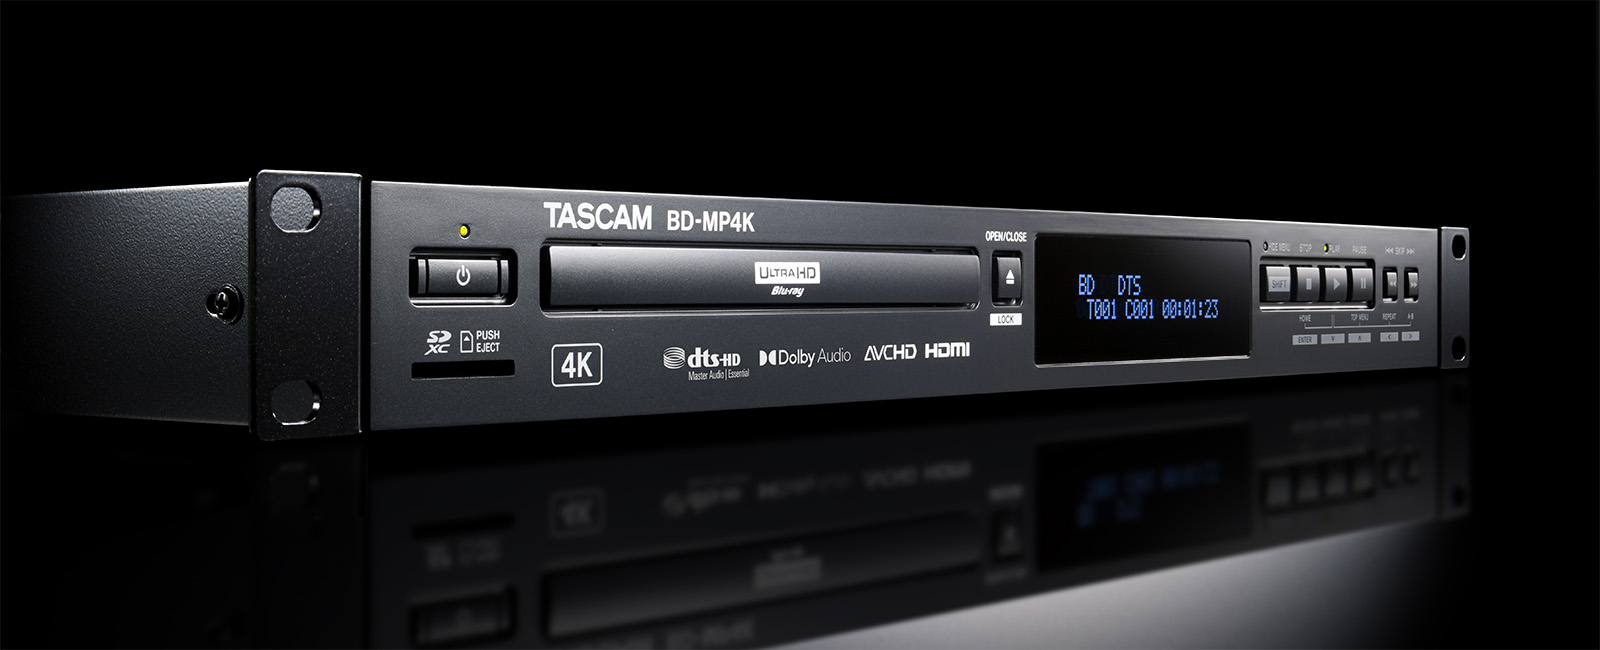 TASCAM Expands Professional Blu-ray Line with BD-MP4K Professional